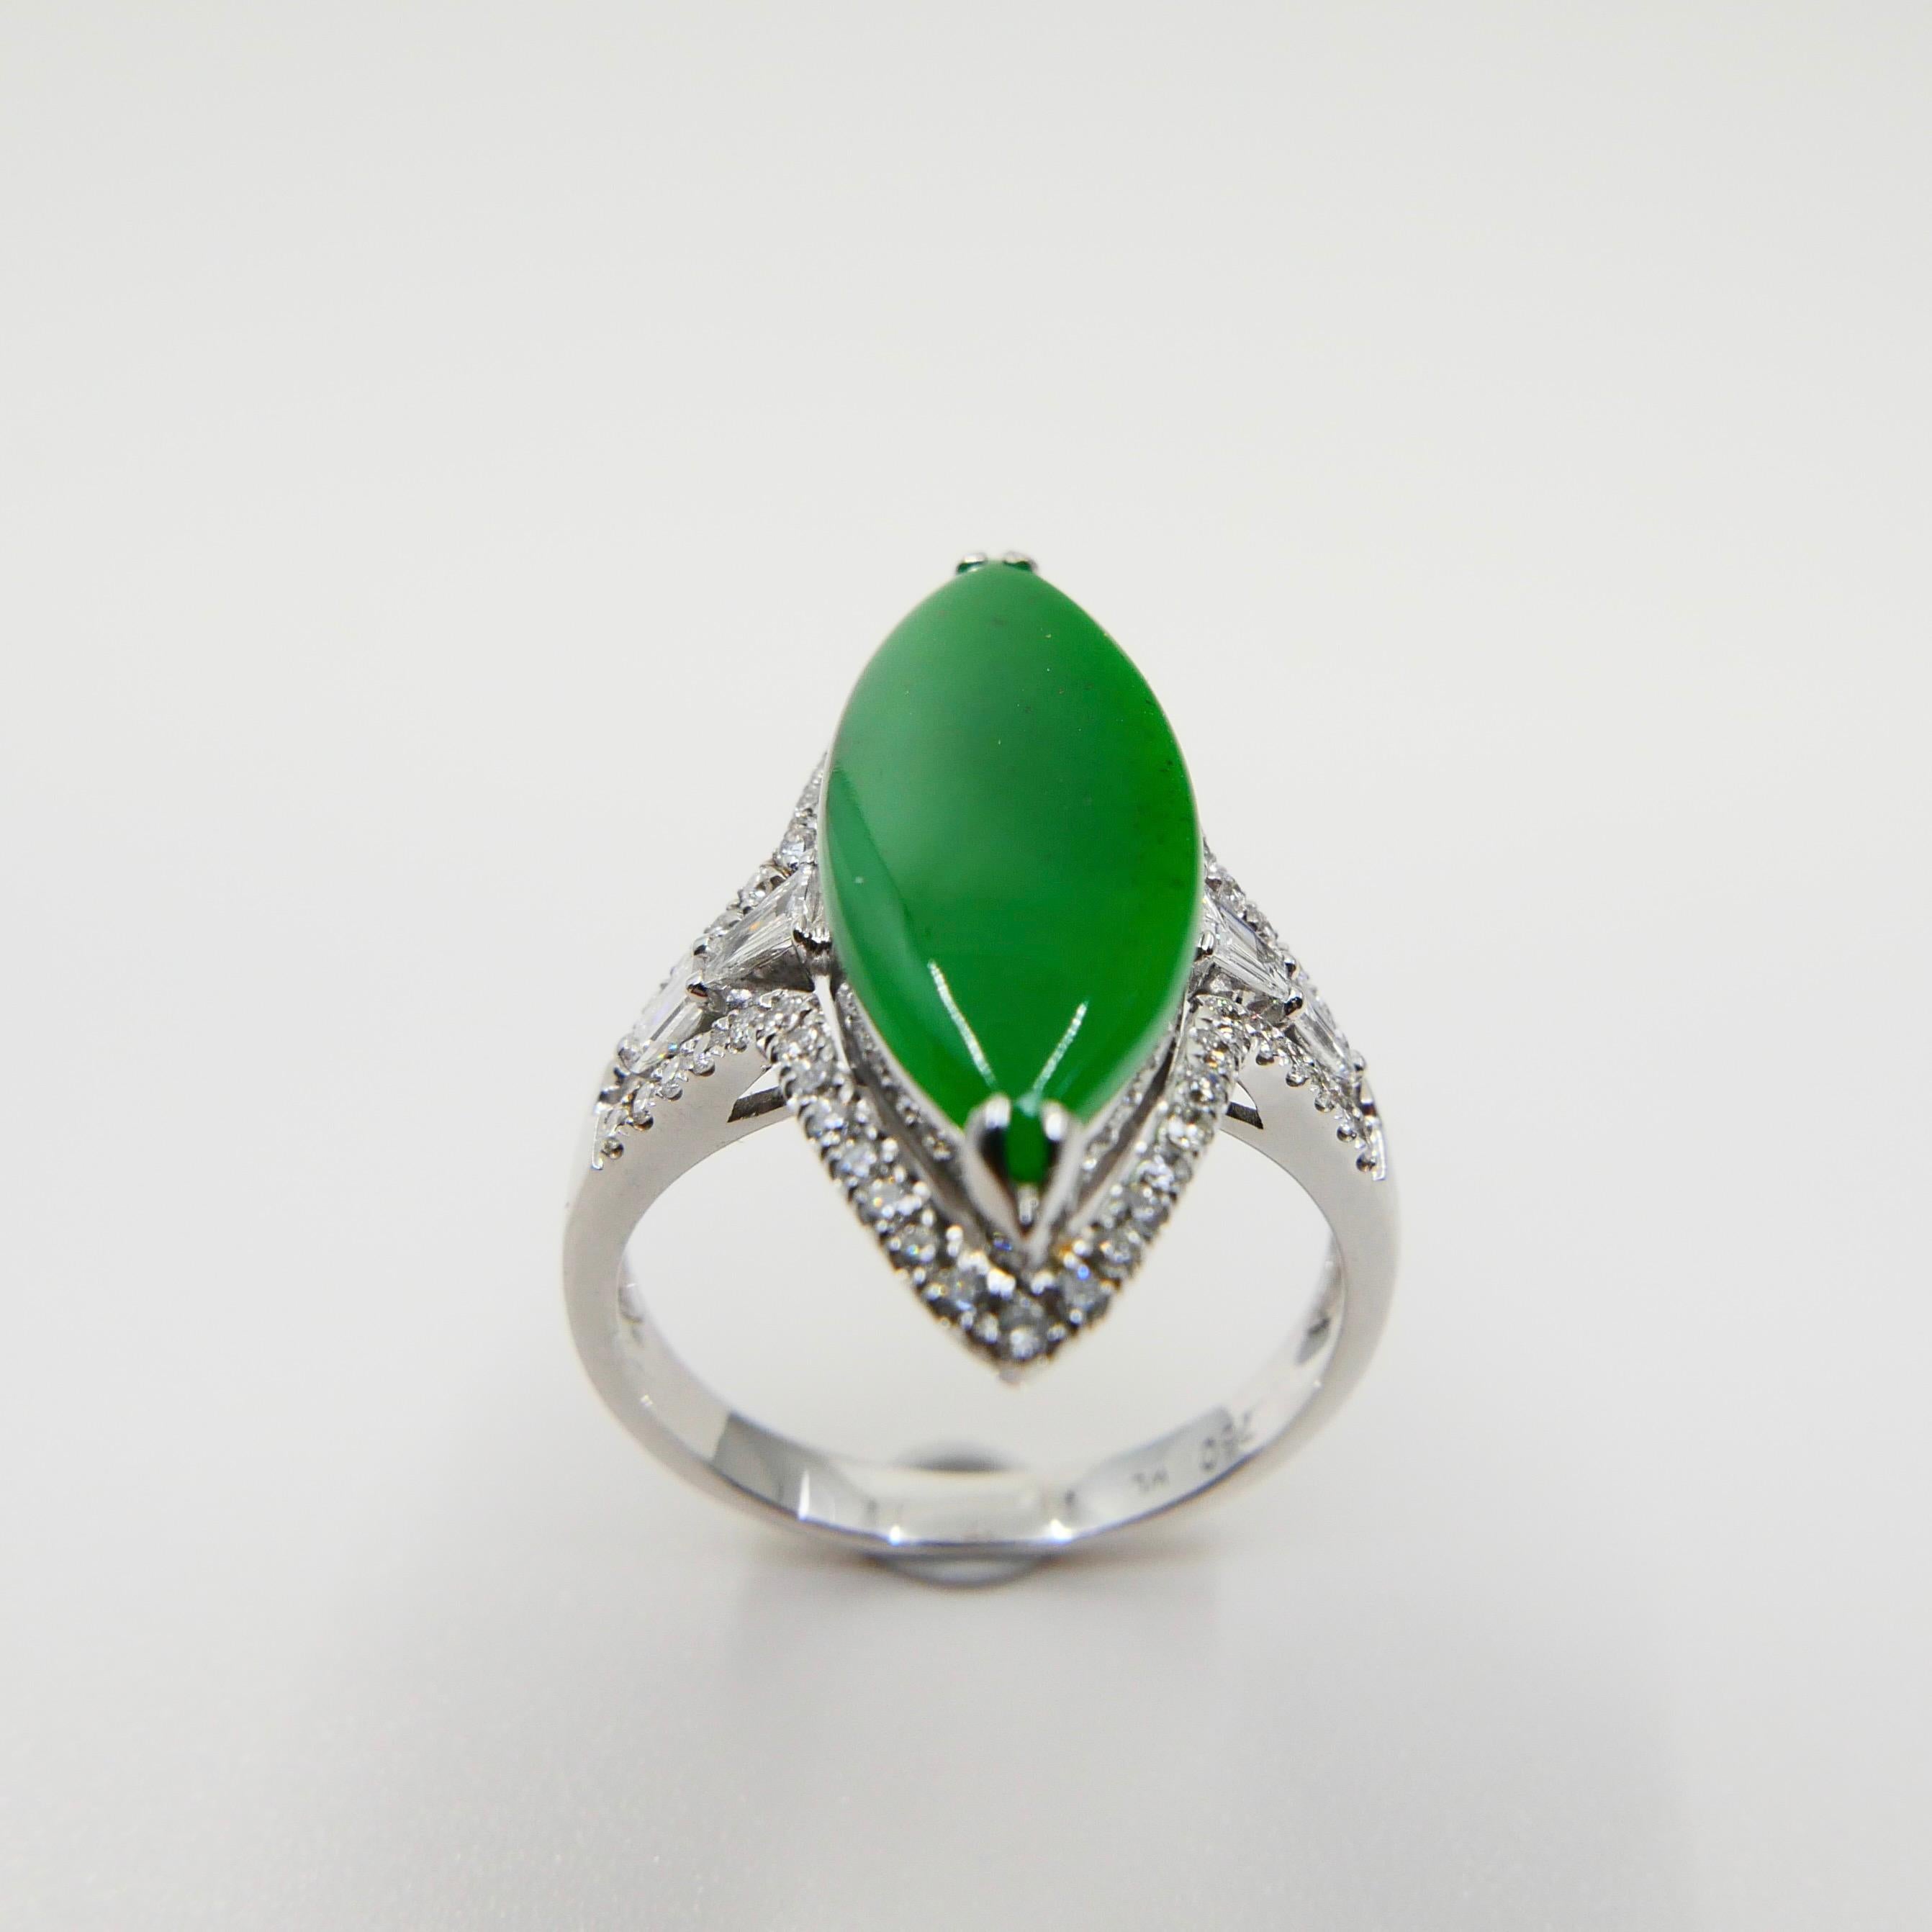 Marquise Cut Certified Jadeite Jade and Diamond Cocktail Ring, Intense Apple Green Color For Sale